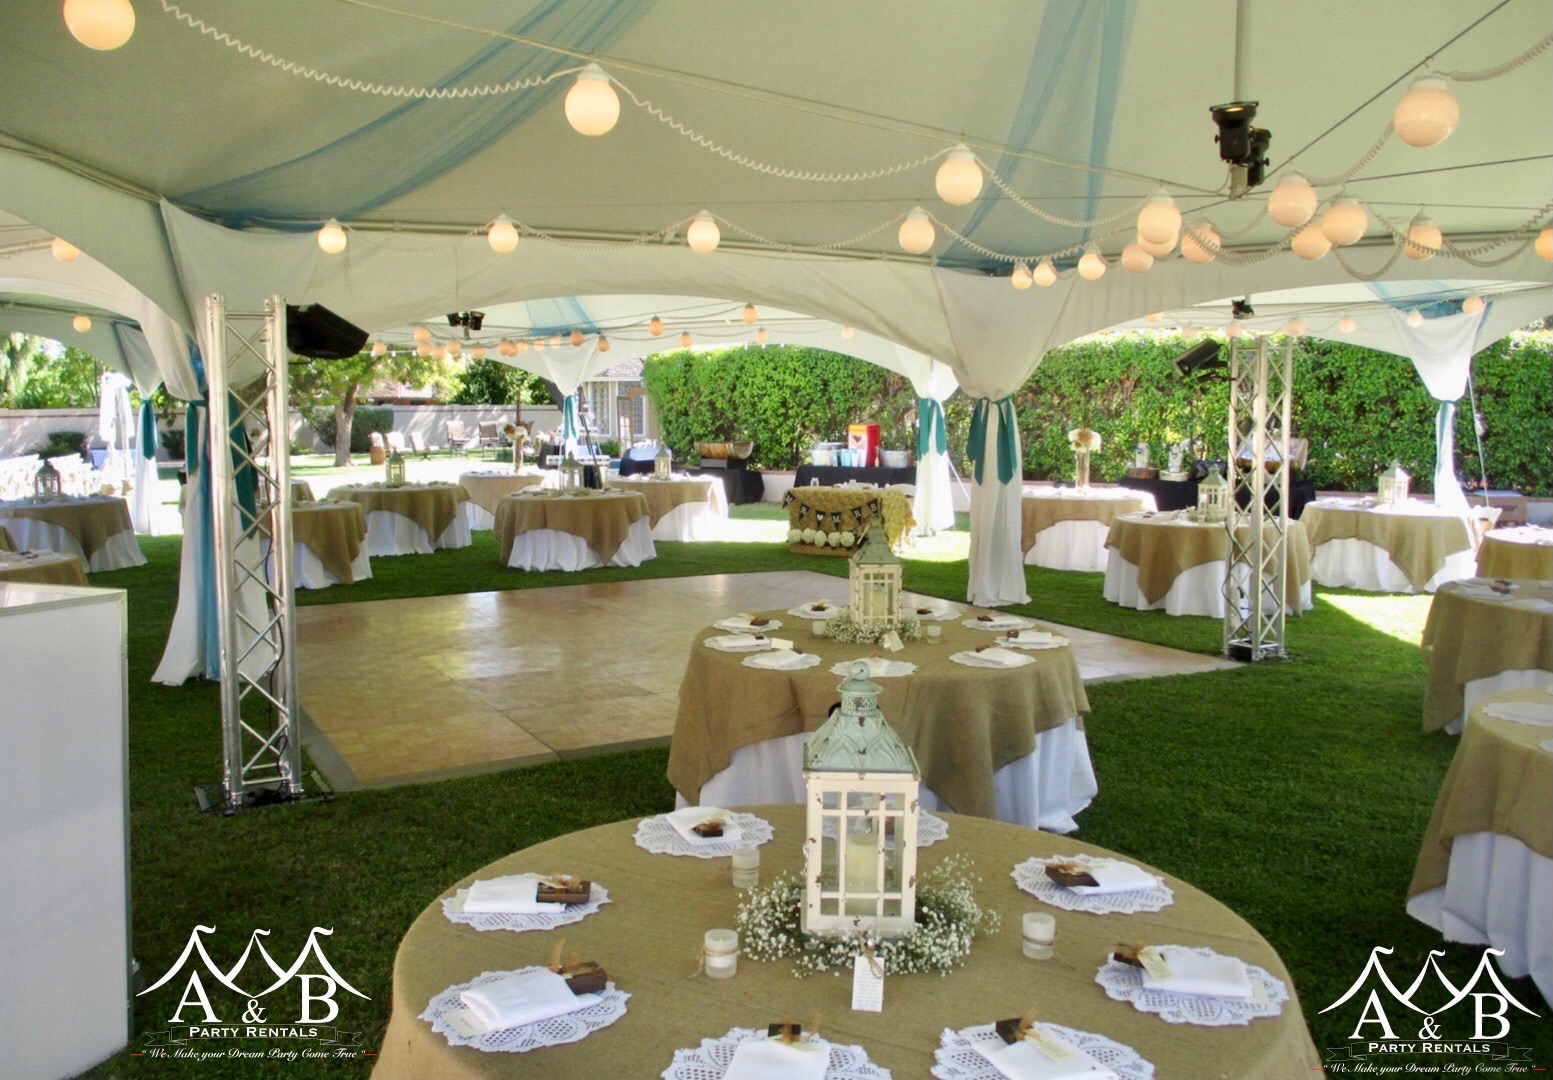 A daytime outdoor wedding reception under a tent featuring tent lights, a dance floor, tables with elegant linens, and place settings. The image captures an idyllic outdoor wedding reception setting under a tent, adorned with lights, a dance floor, well-appointed tables showcasing elegant linens, and meticulously arranged place settings. This picturesque scene is provided by A&B Party Rentals in Salisbury, MD.